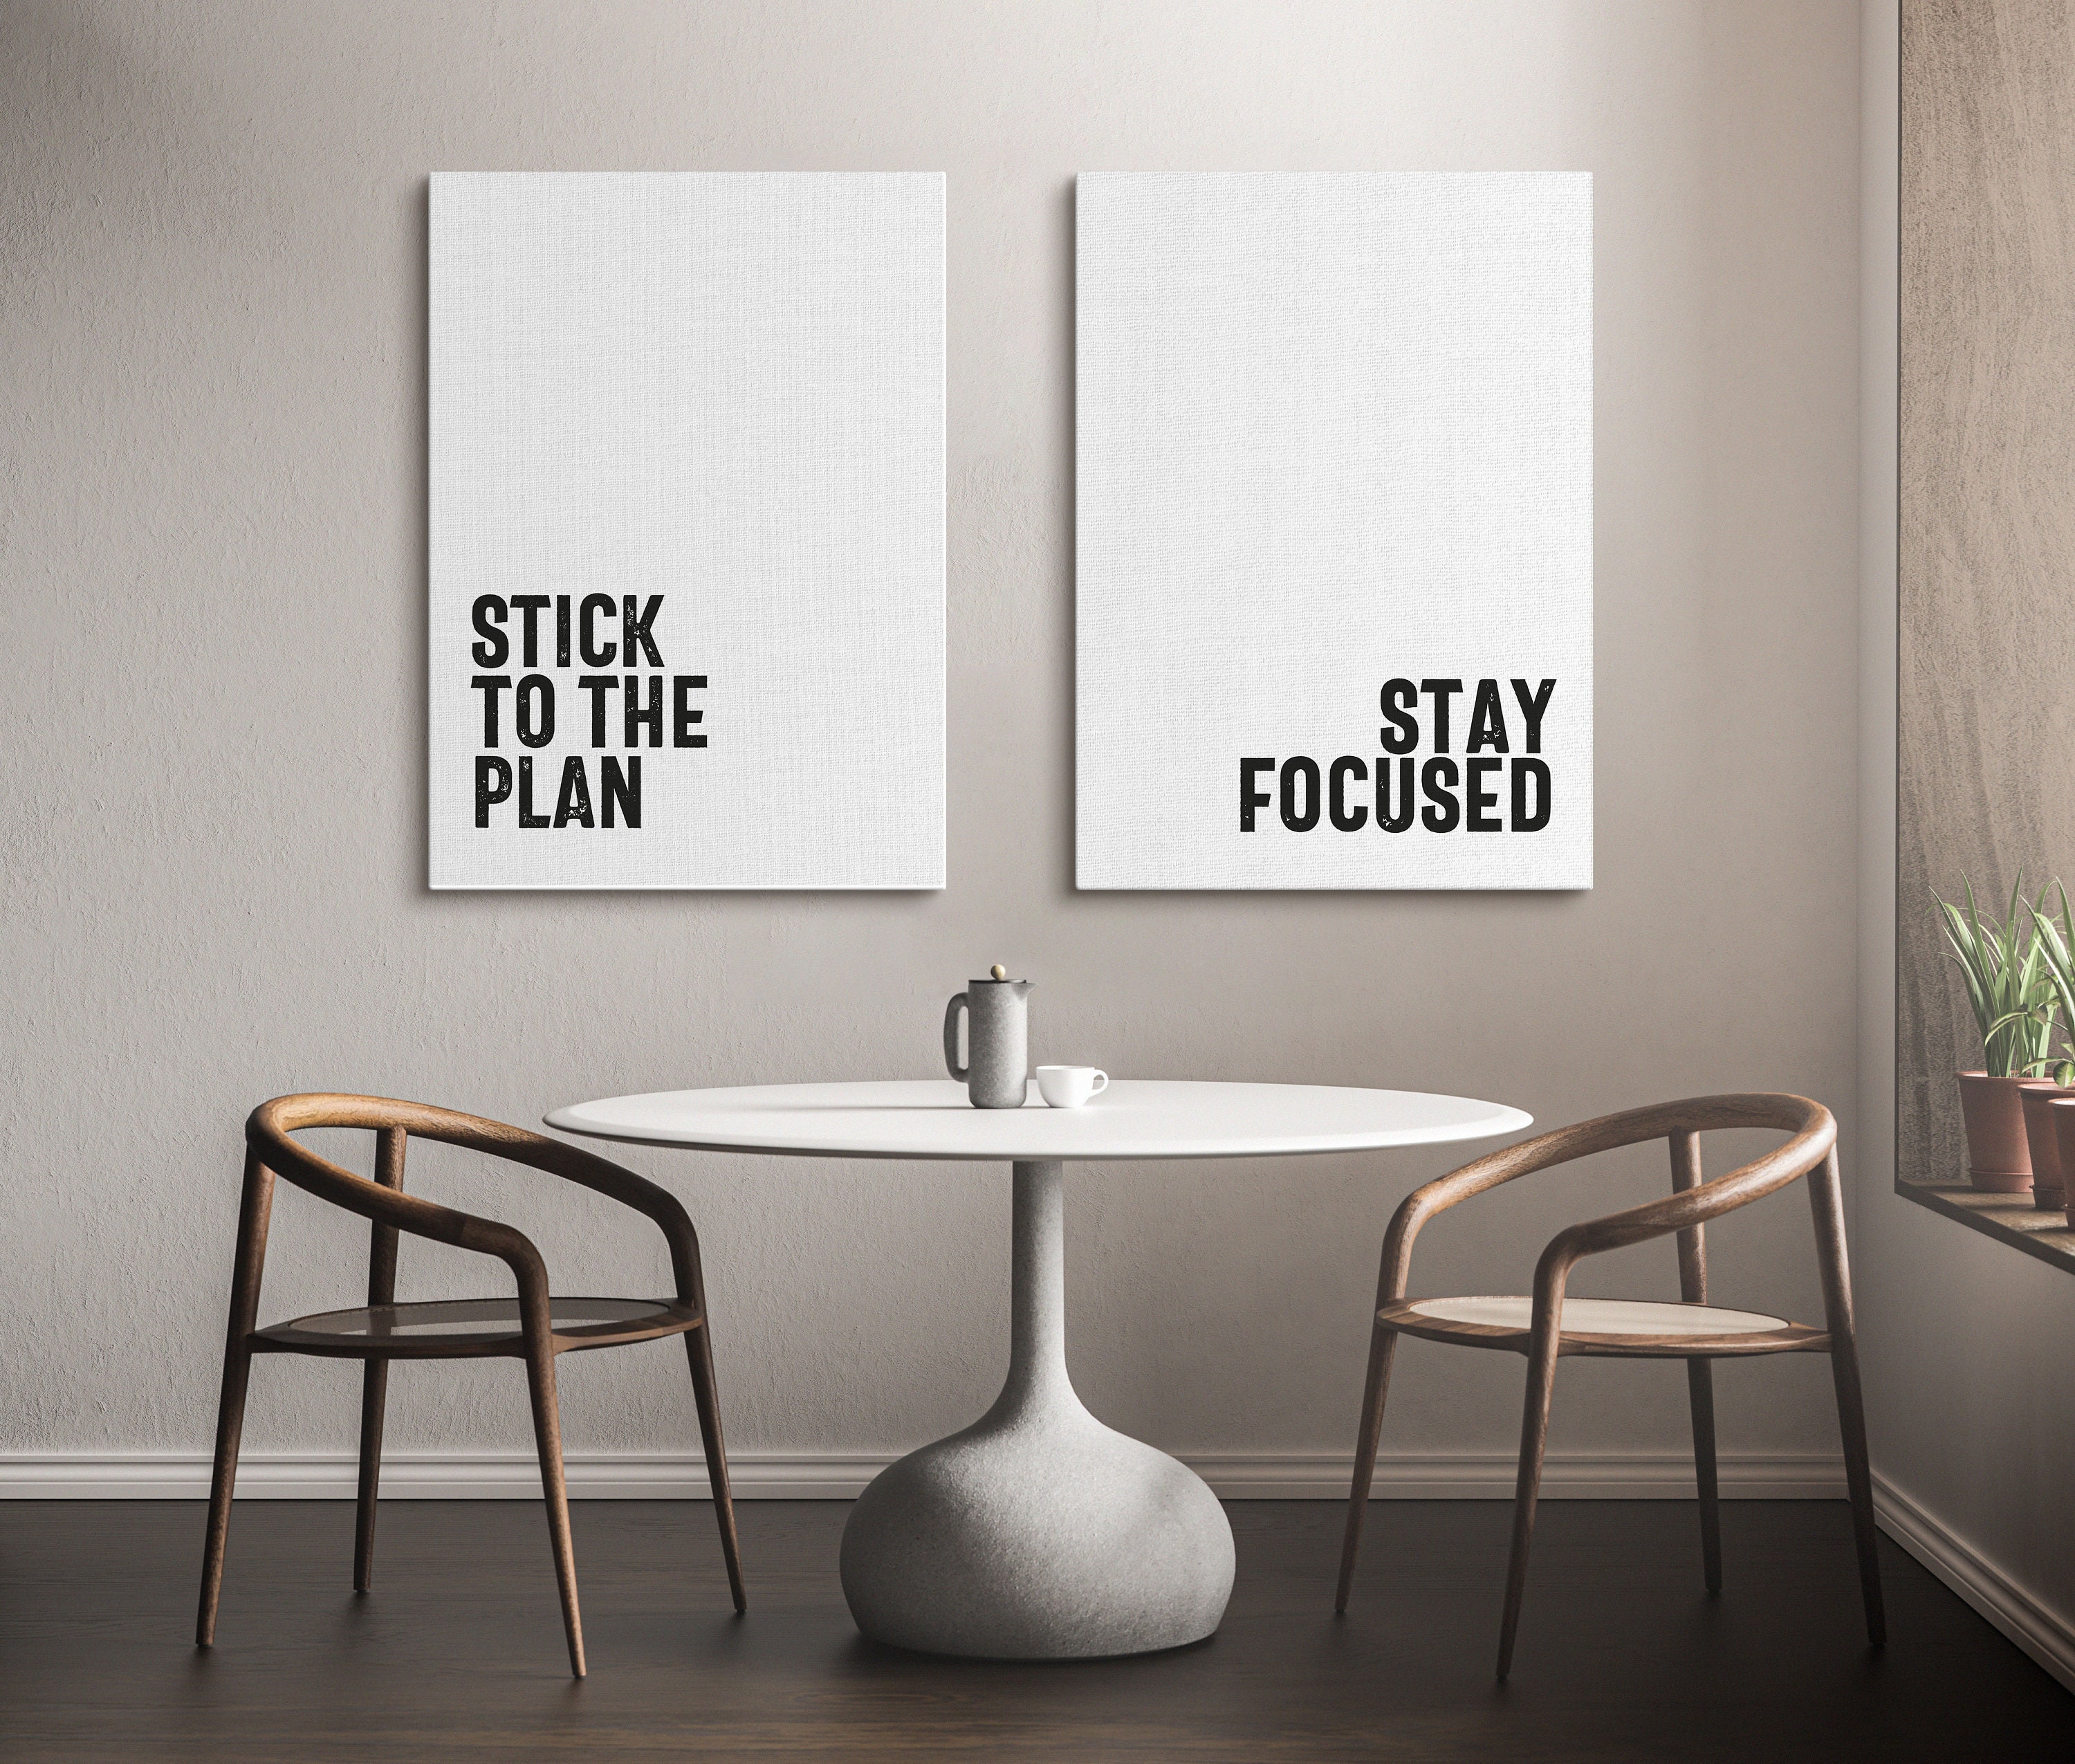 How Focused Are You 3 Poster Pack